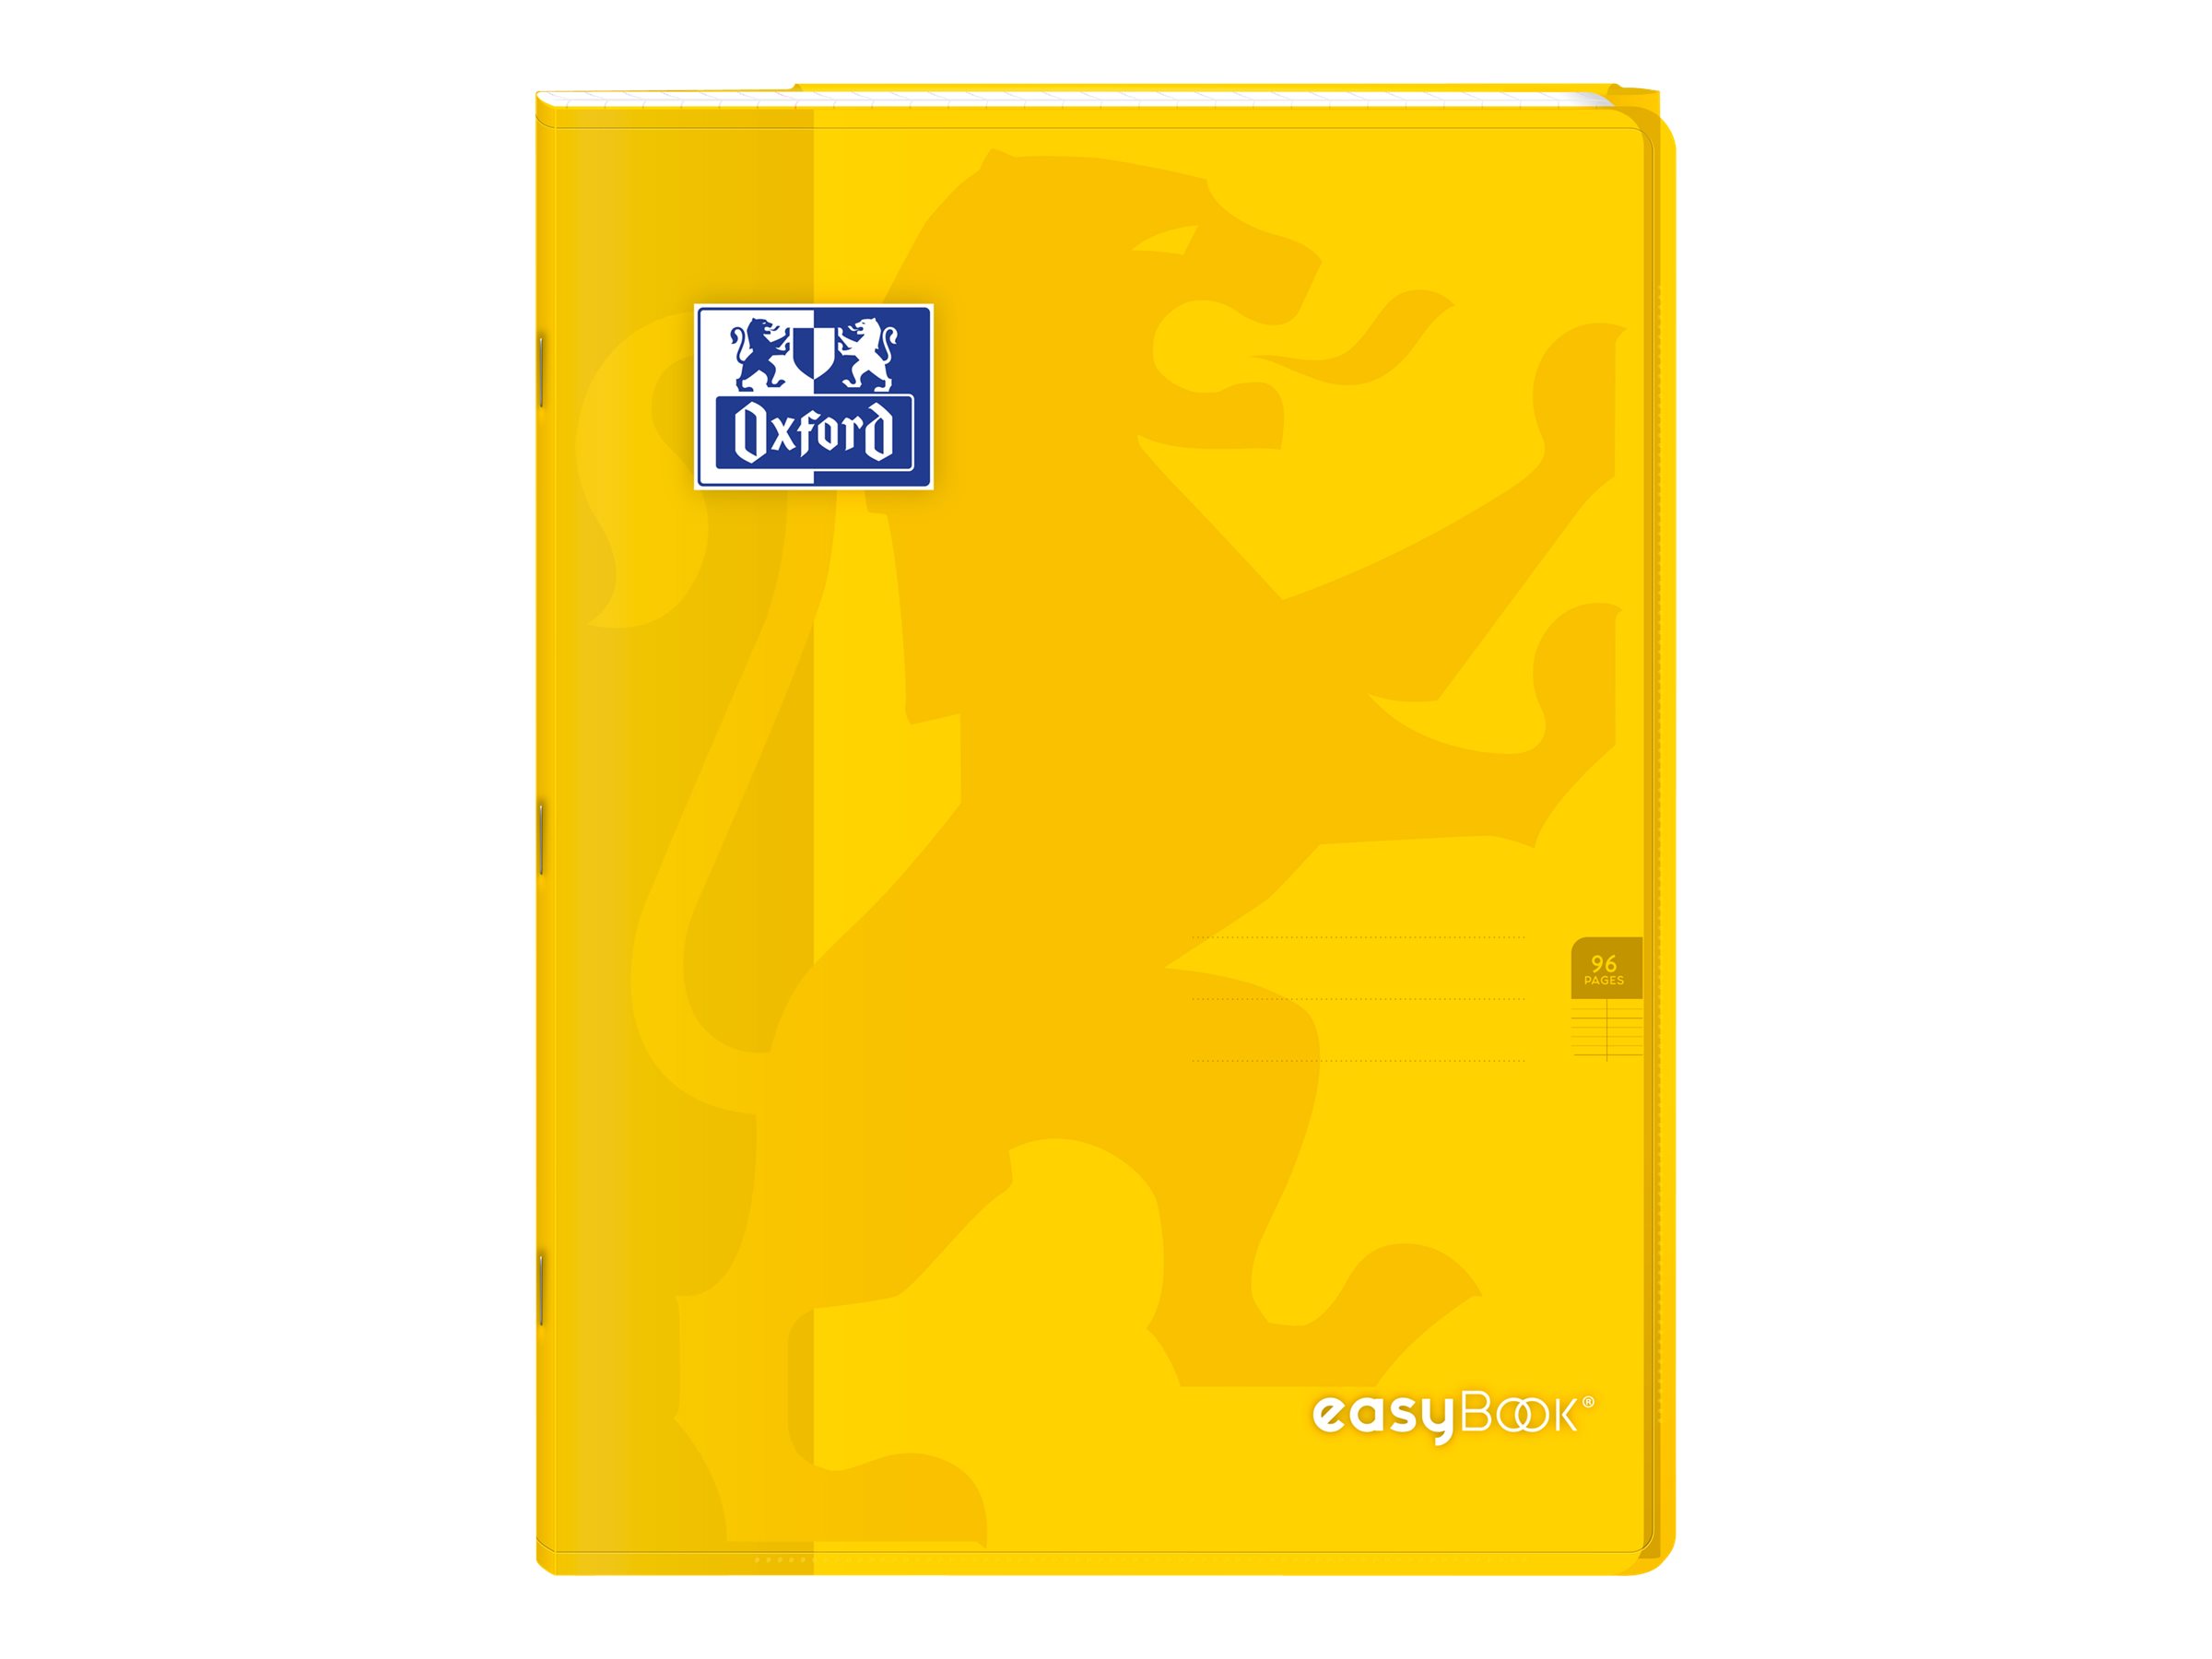 Oxford EasyBook - Cahier polypro 24 x 32 cm - 96 pages - grands carreaux (Seyes) - jaune